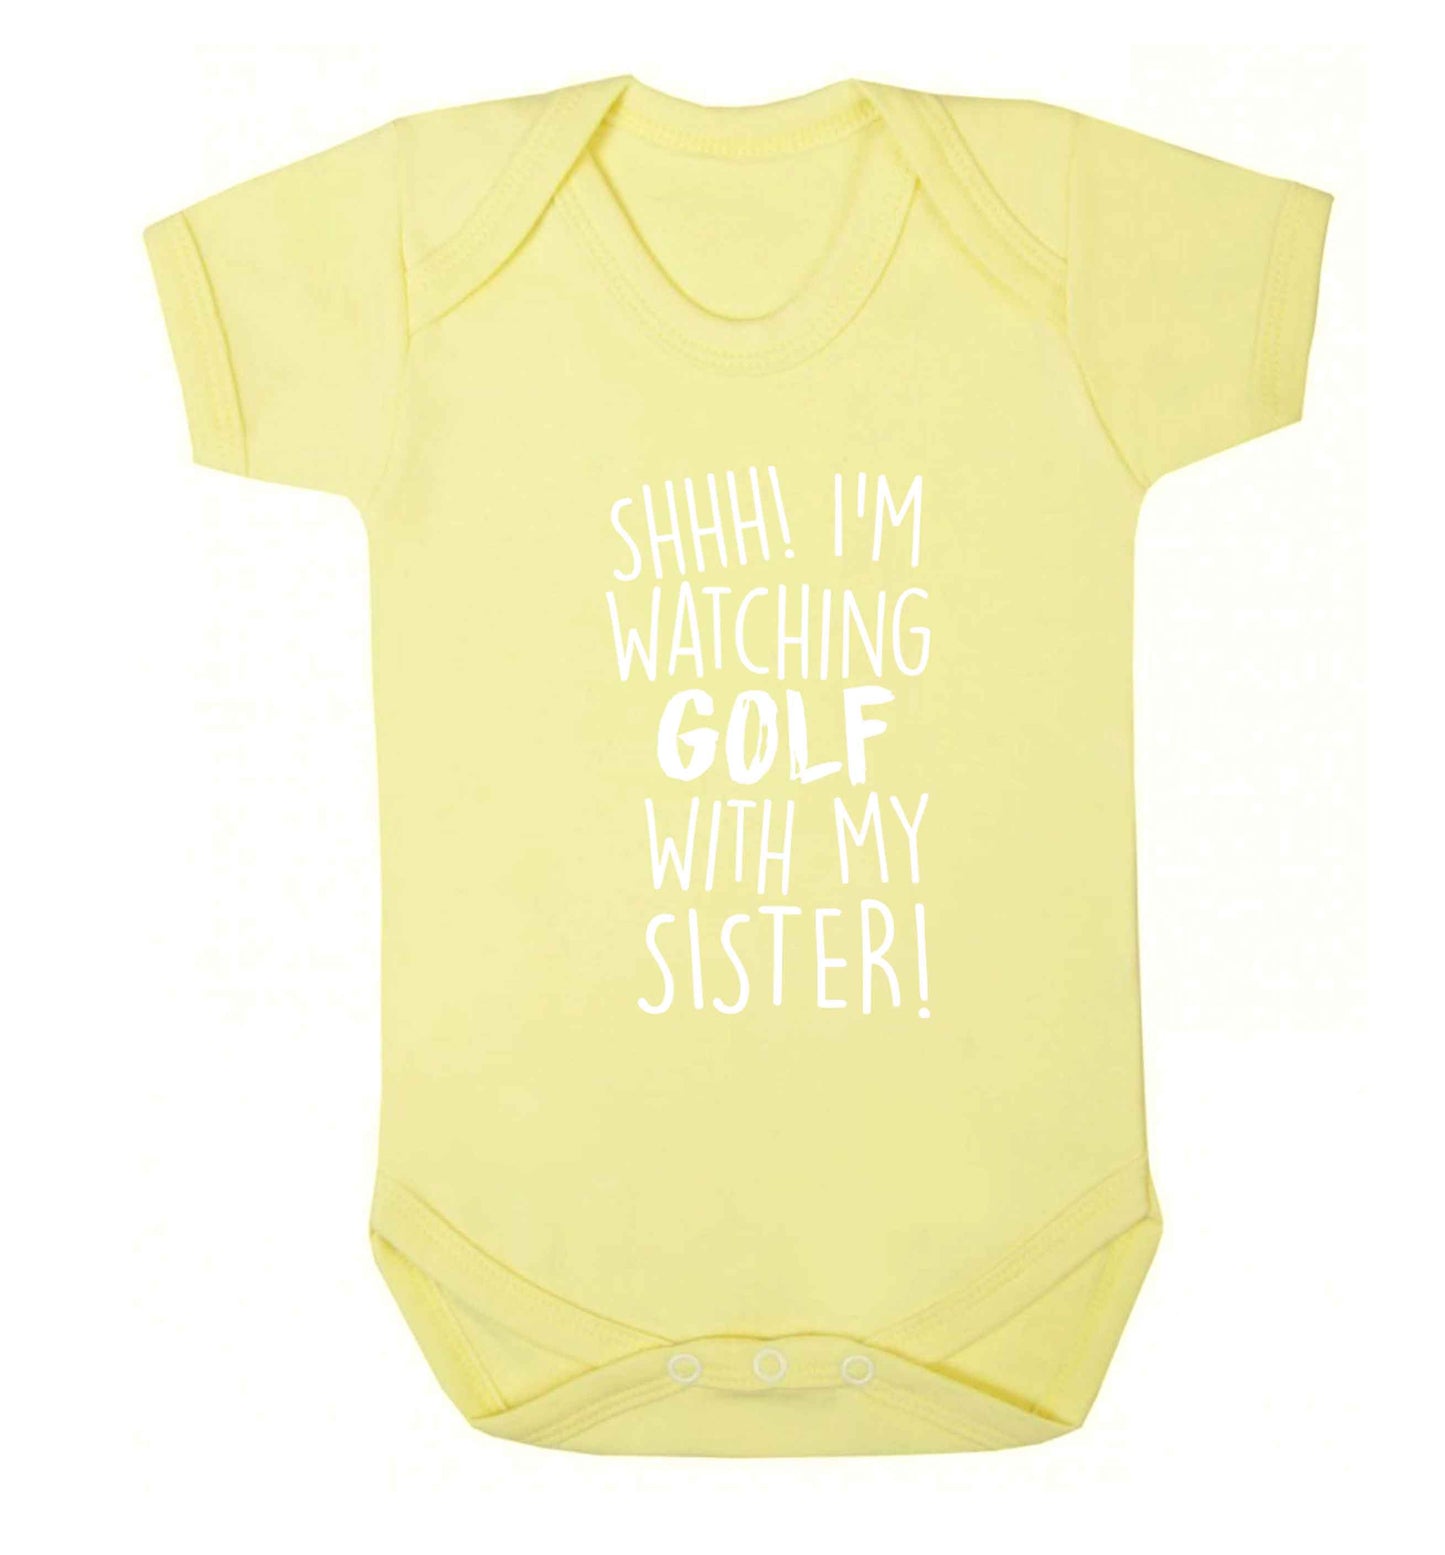 Shh I'm watching golf with my sister Baby Vest pale yellow 18-24 months